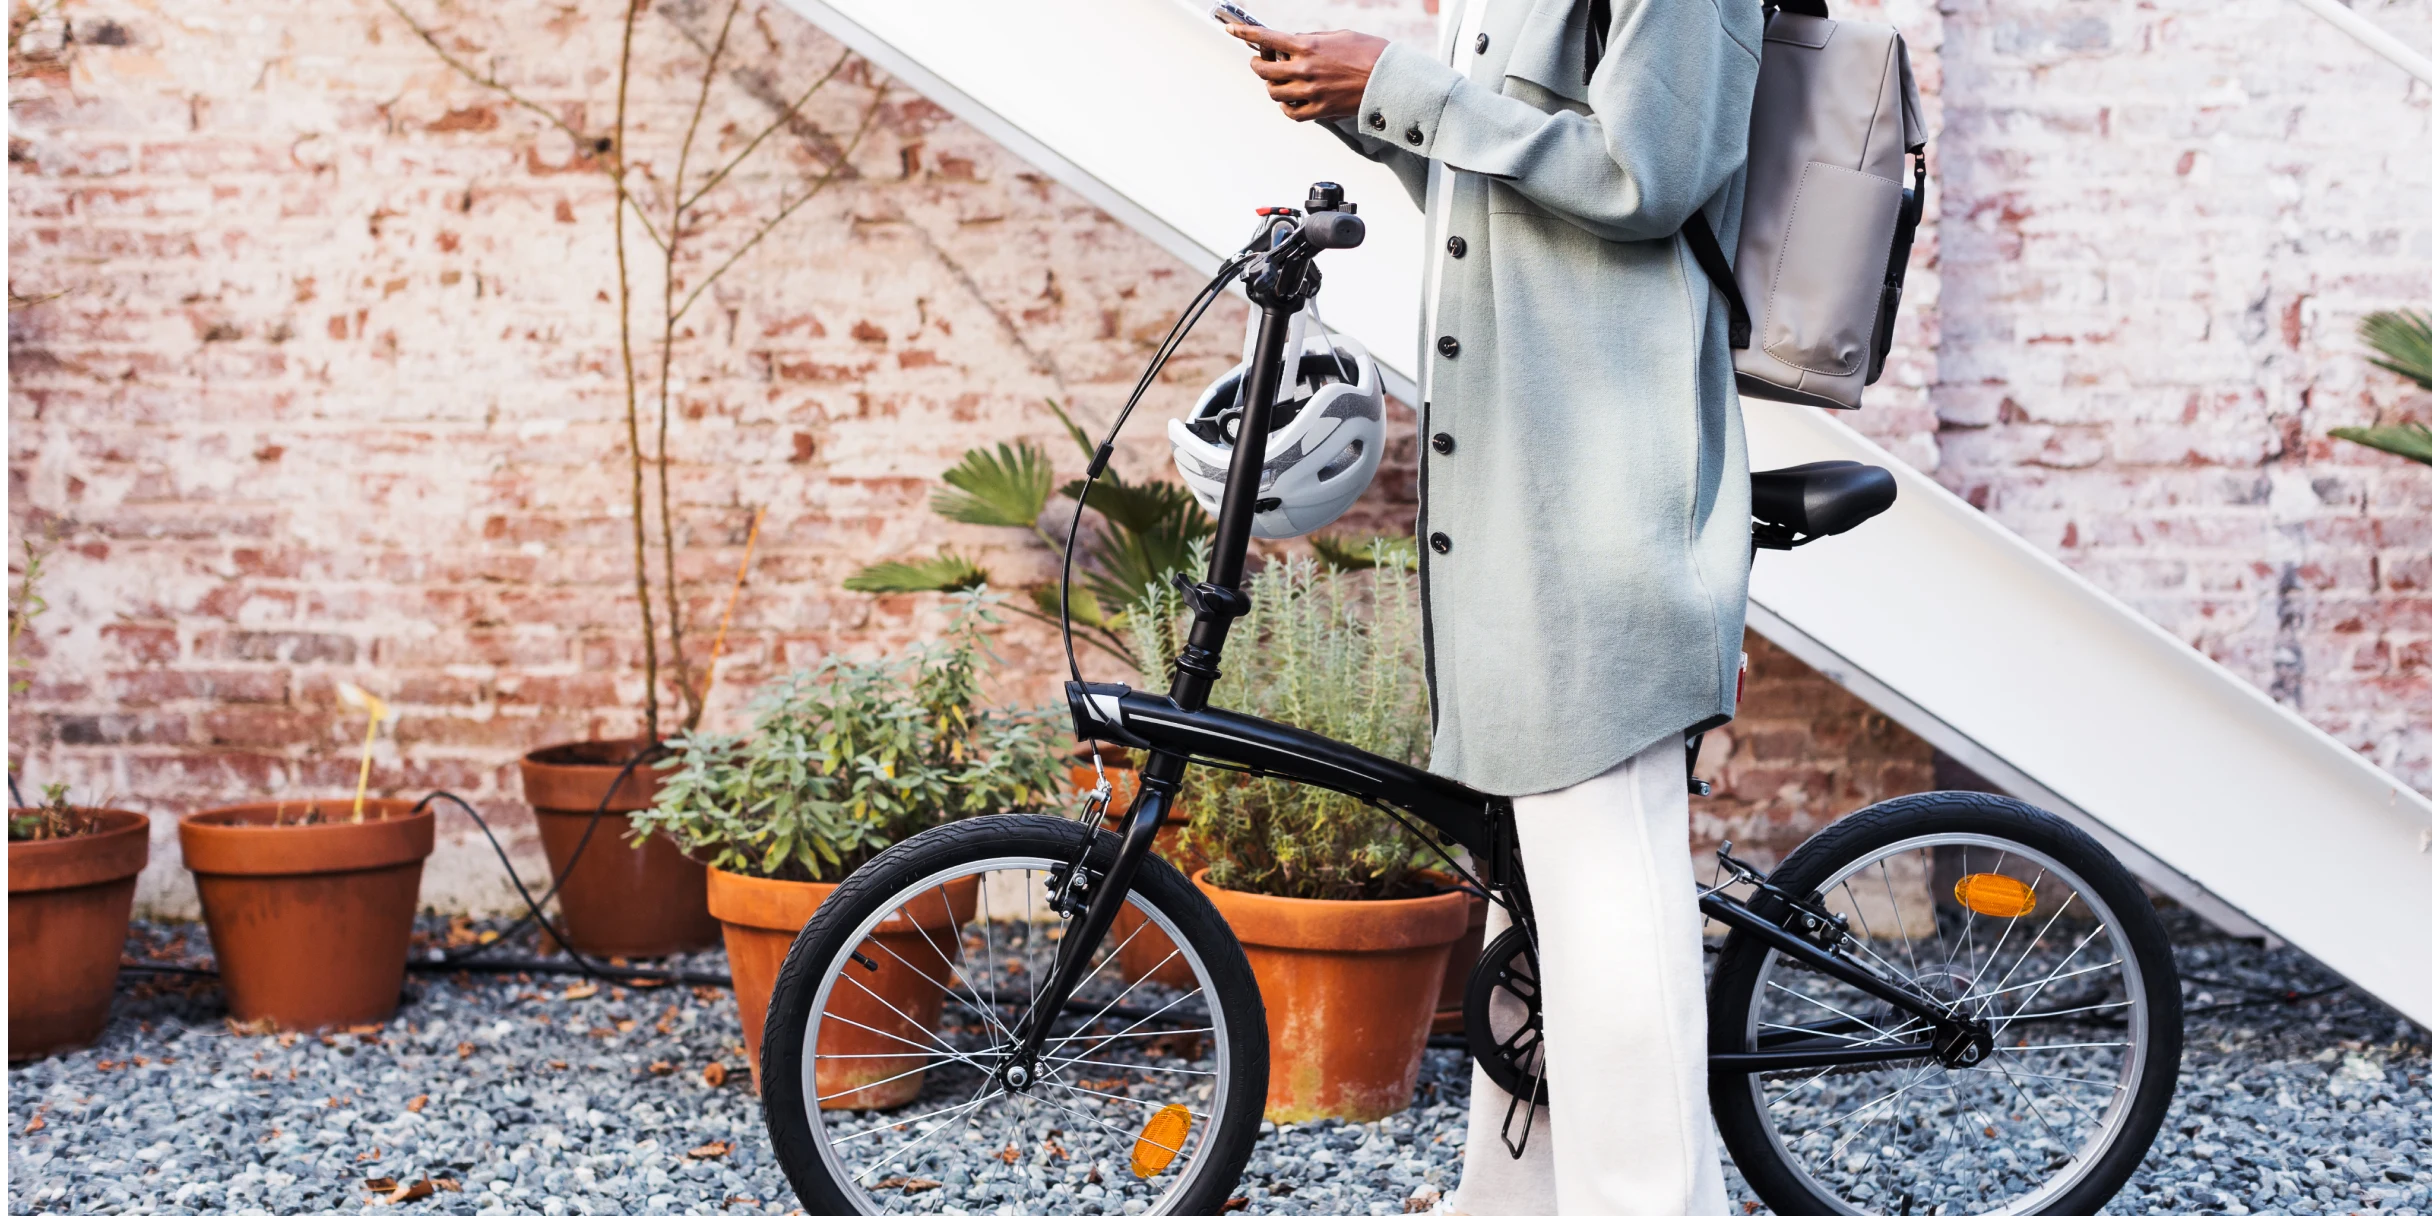 A person in a gray coat stands near a brick wall and straddles a black bicycle